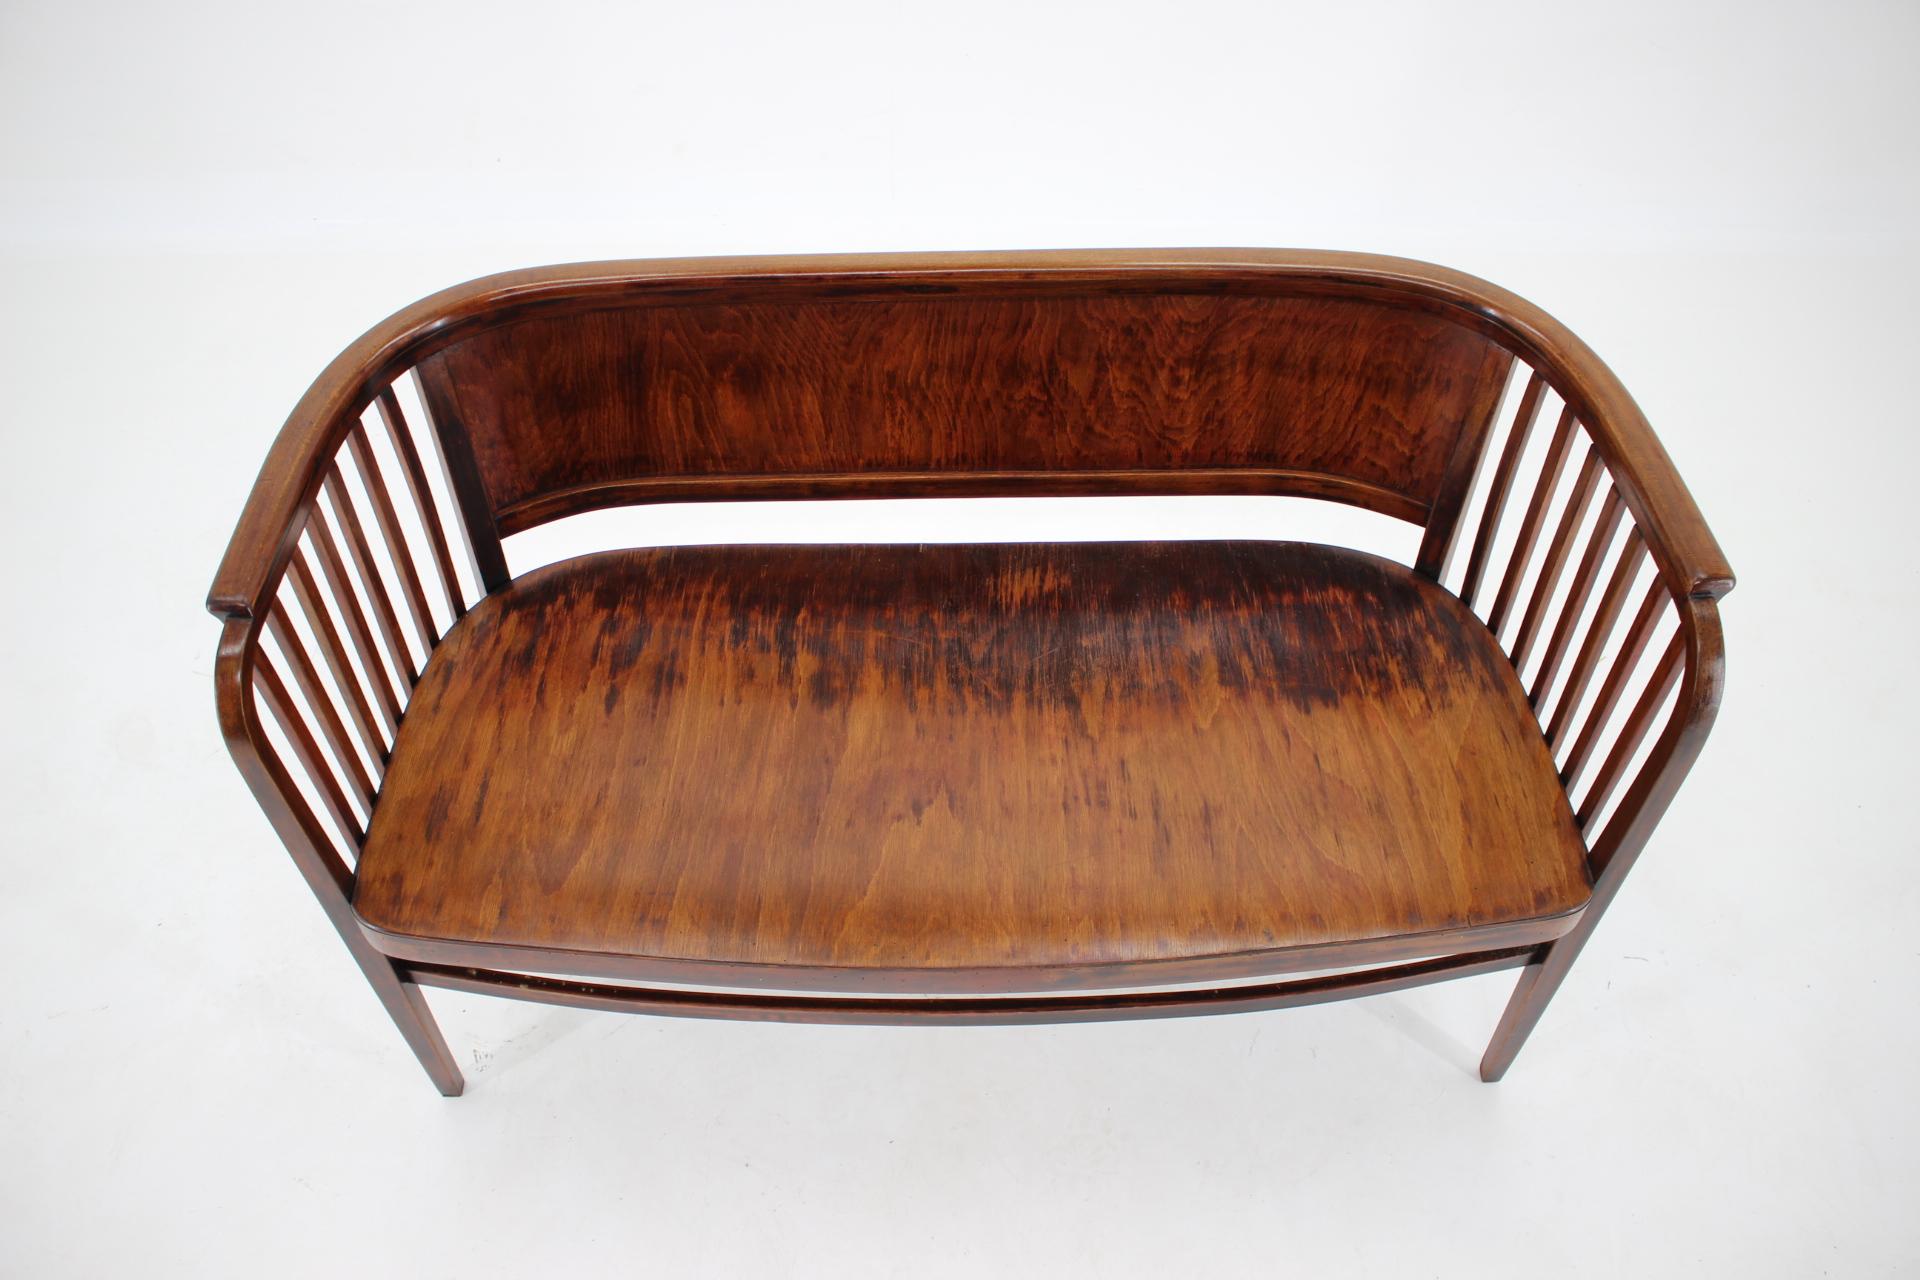 Art Nouveau 1910s Marcel Kammerer Wooden Sofa, Chairs and Stool for Gebruder Thonet